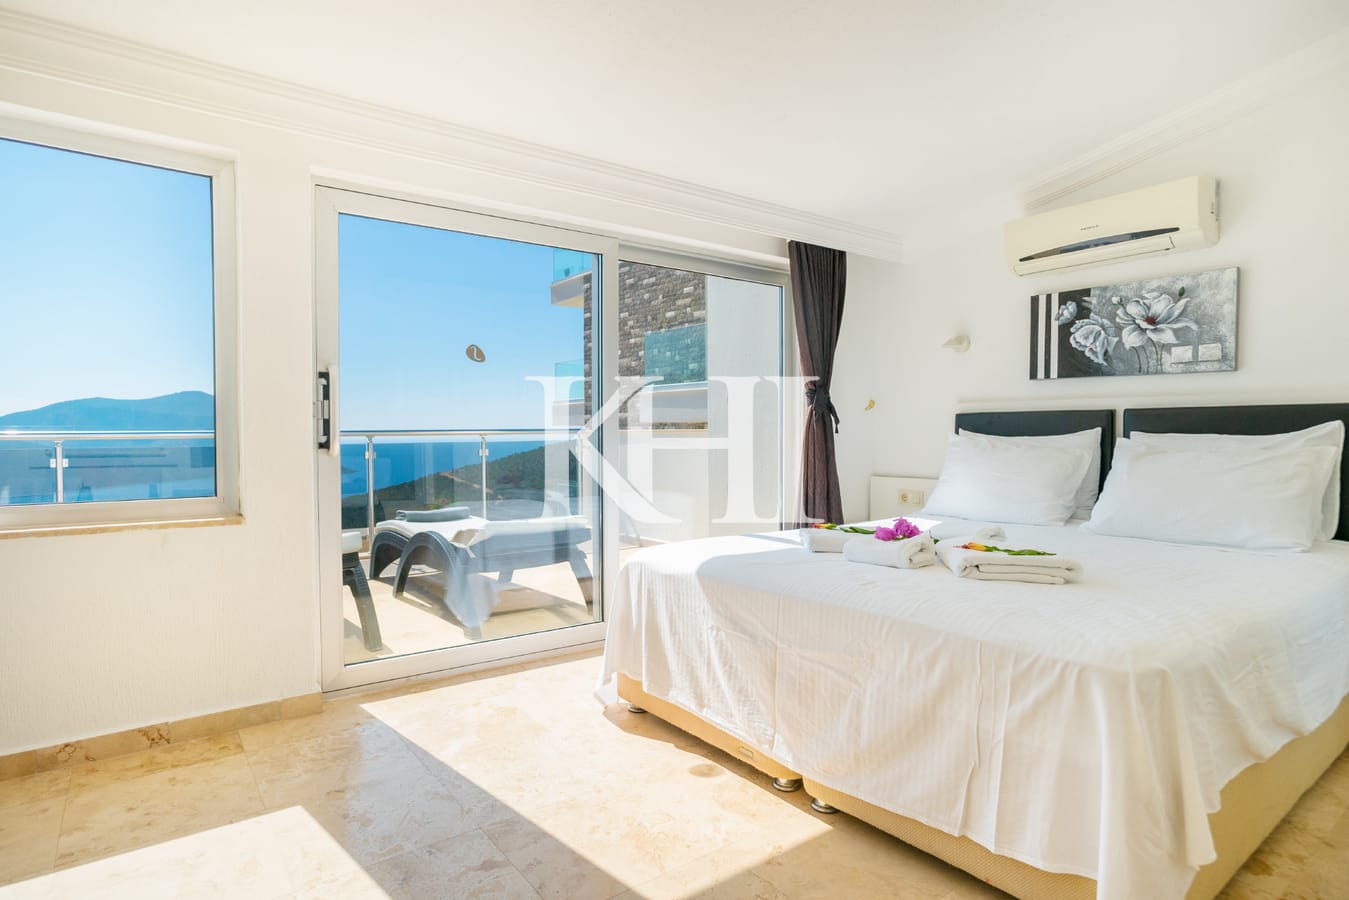 Detached Villa For Sale With Panoramic Kalkan View Slide Image 37